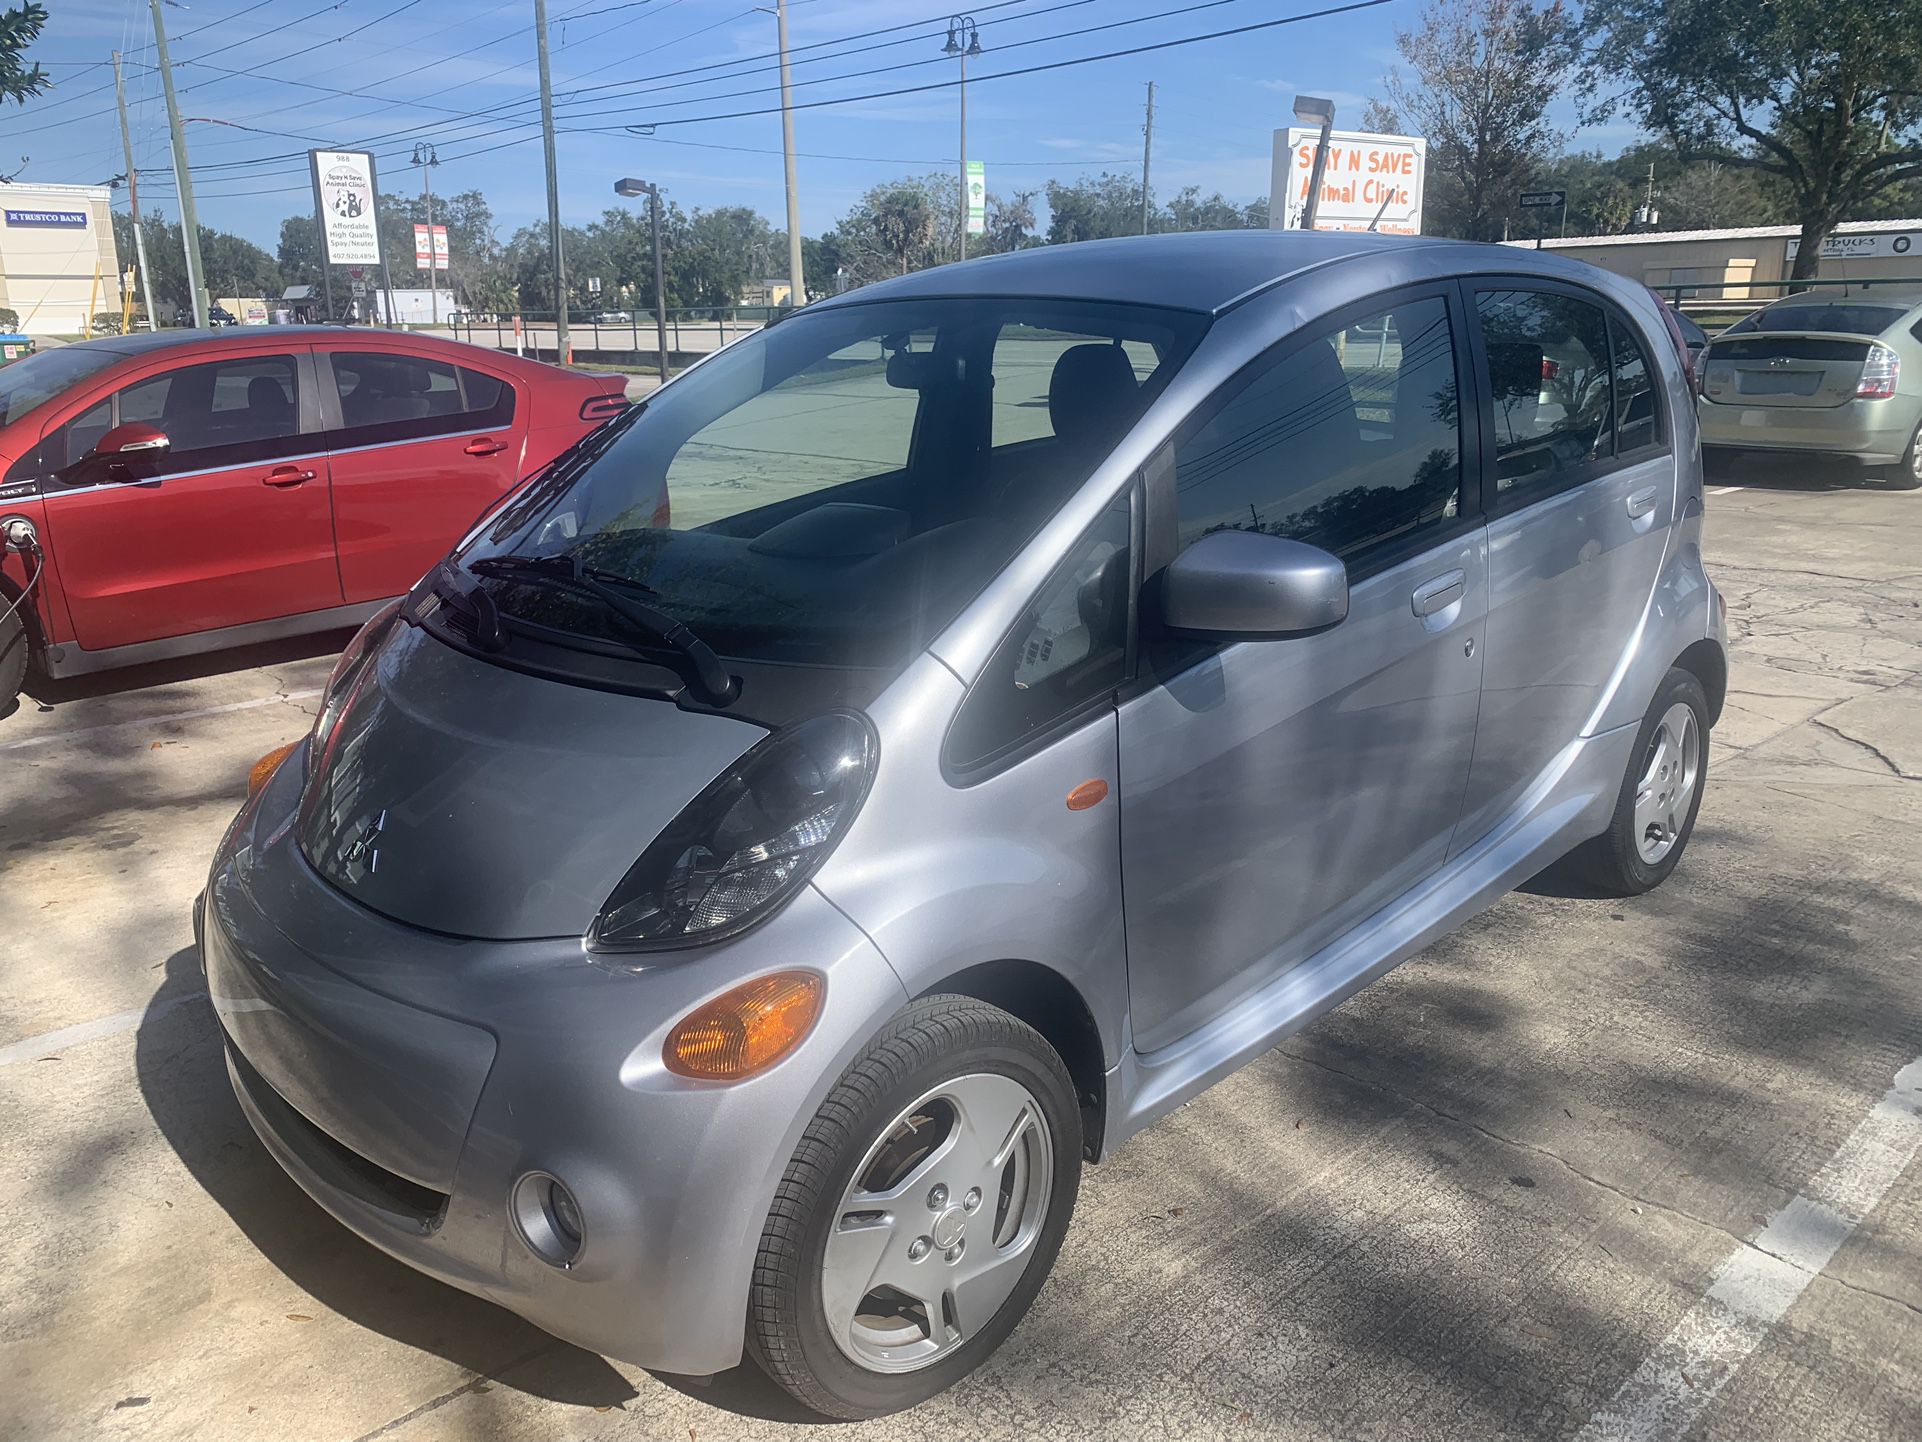 2016 Mitsubishi I-MiEV for Sale in Longwood, FL - OfferUp